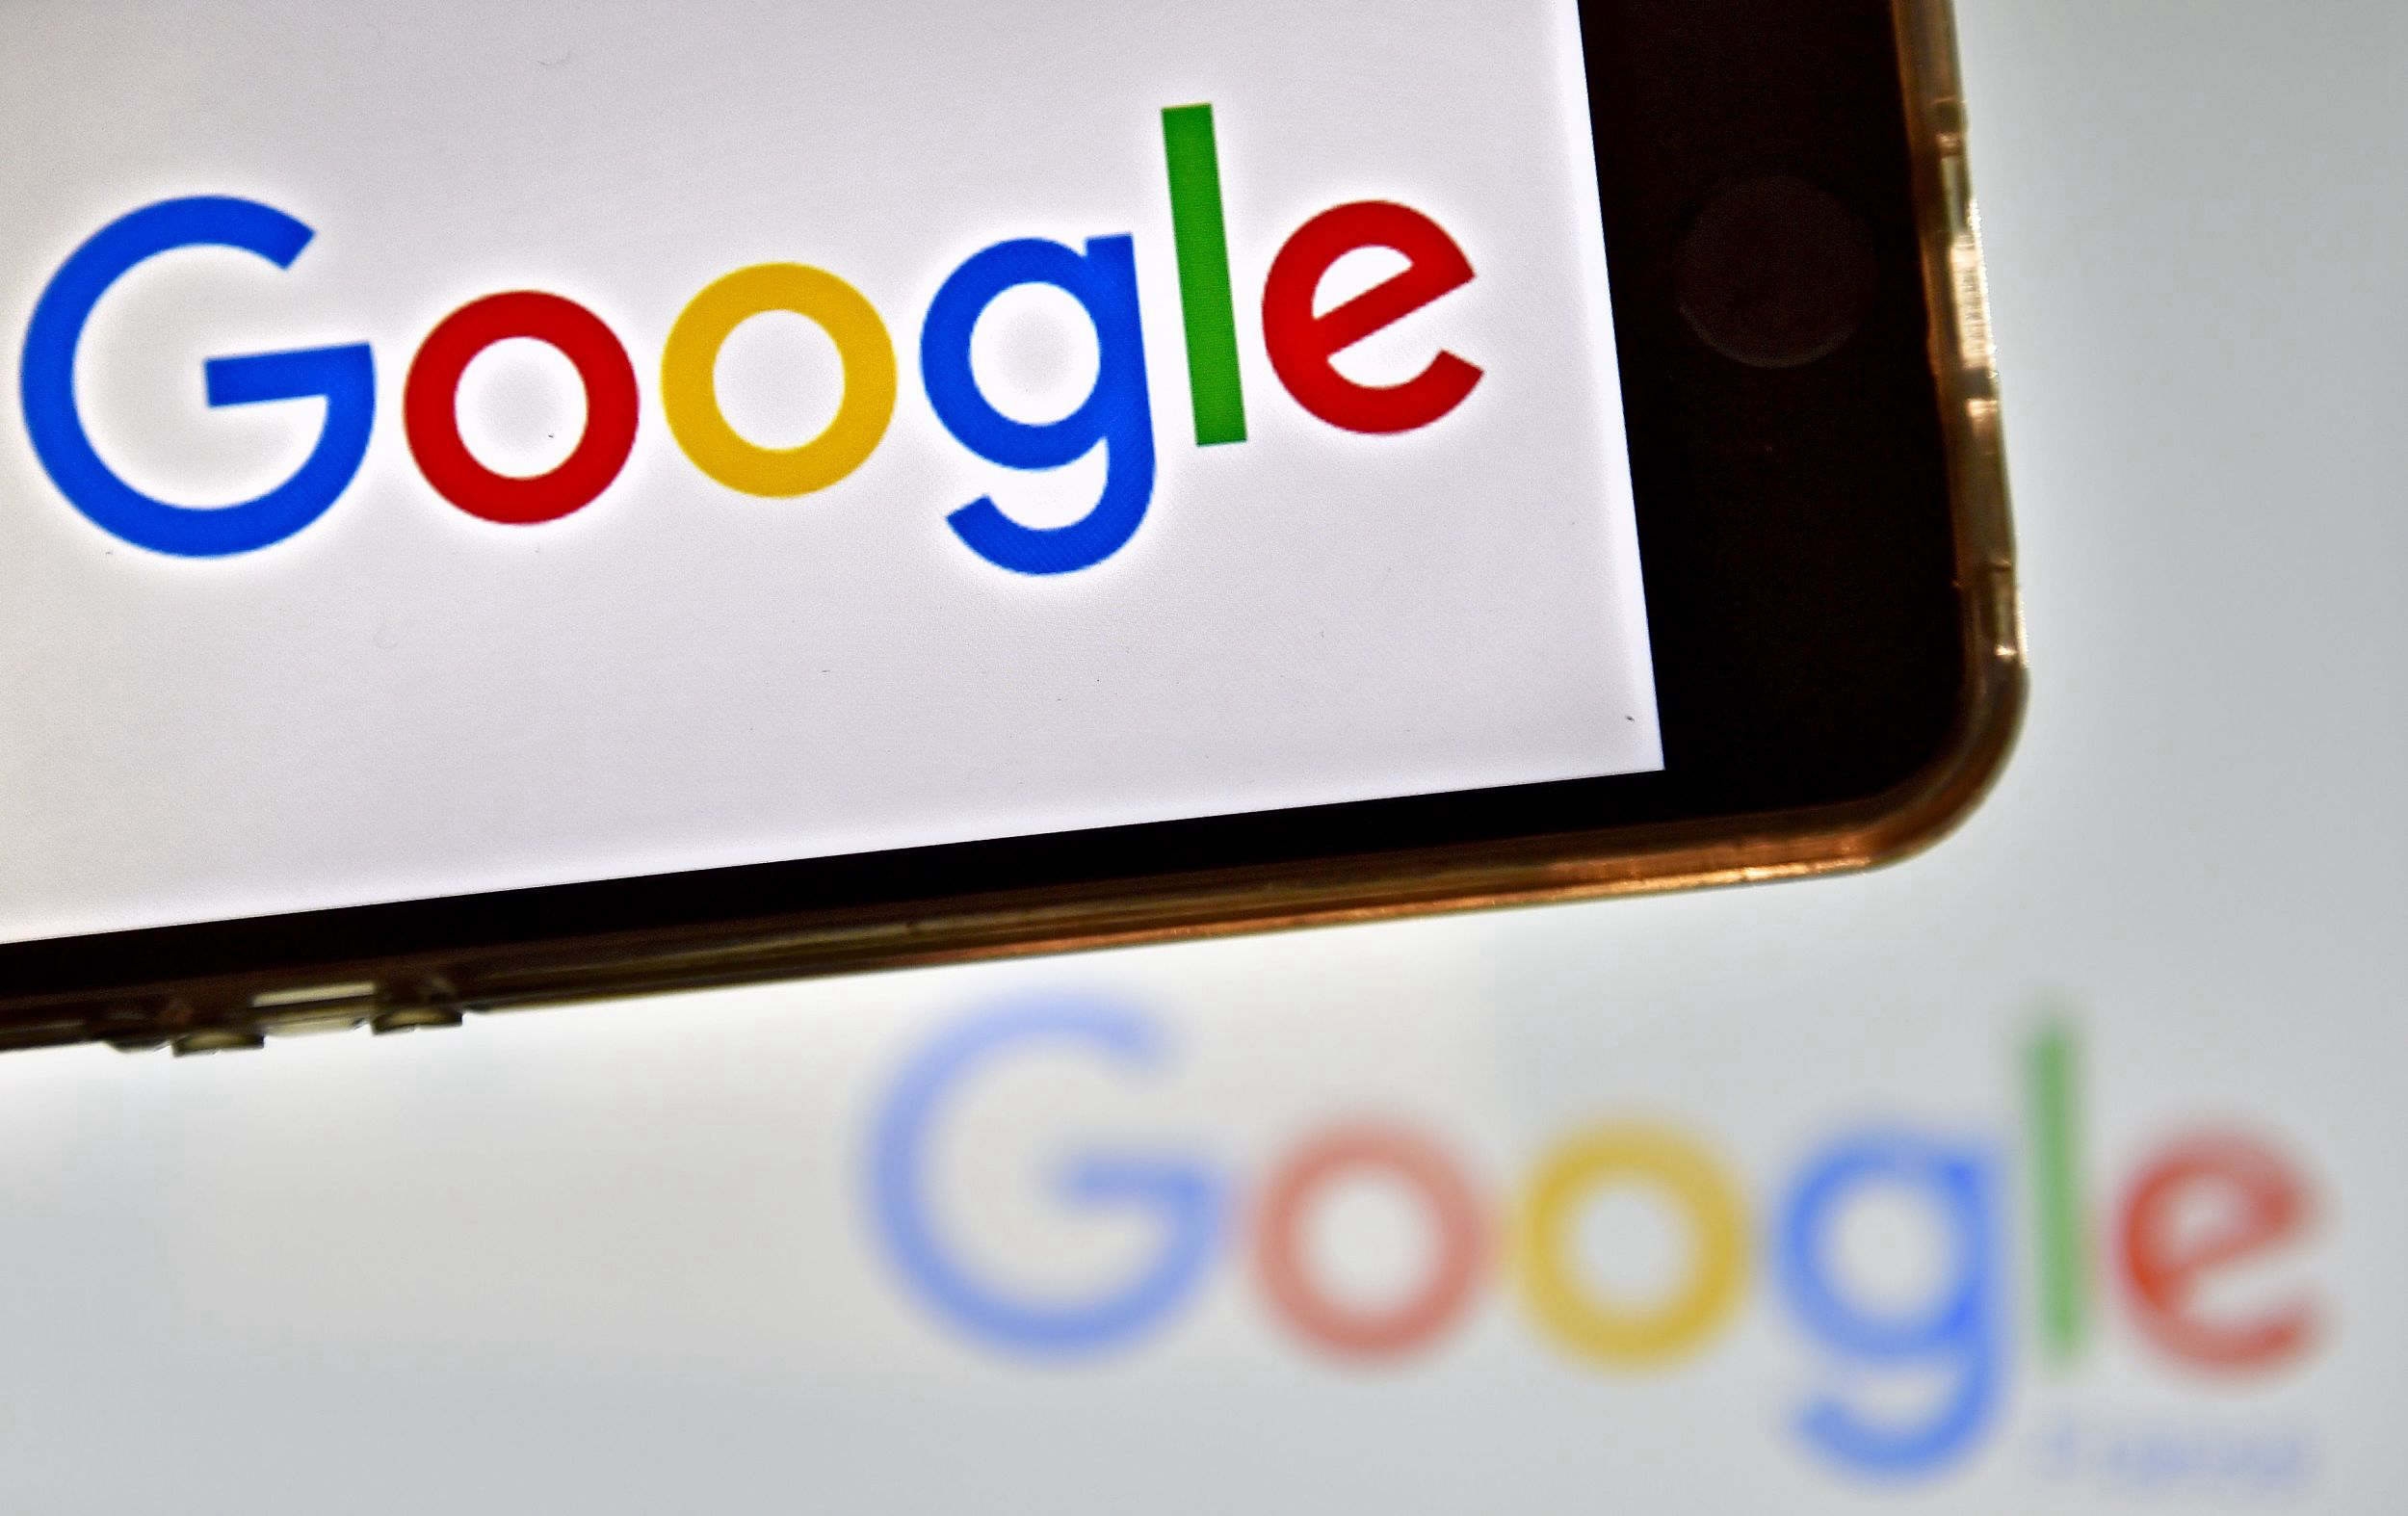 Google could help track cancer cases in the US: study